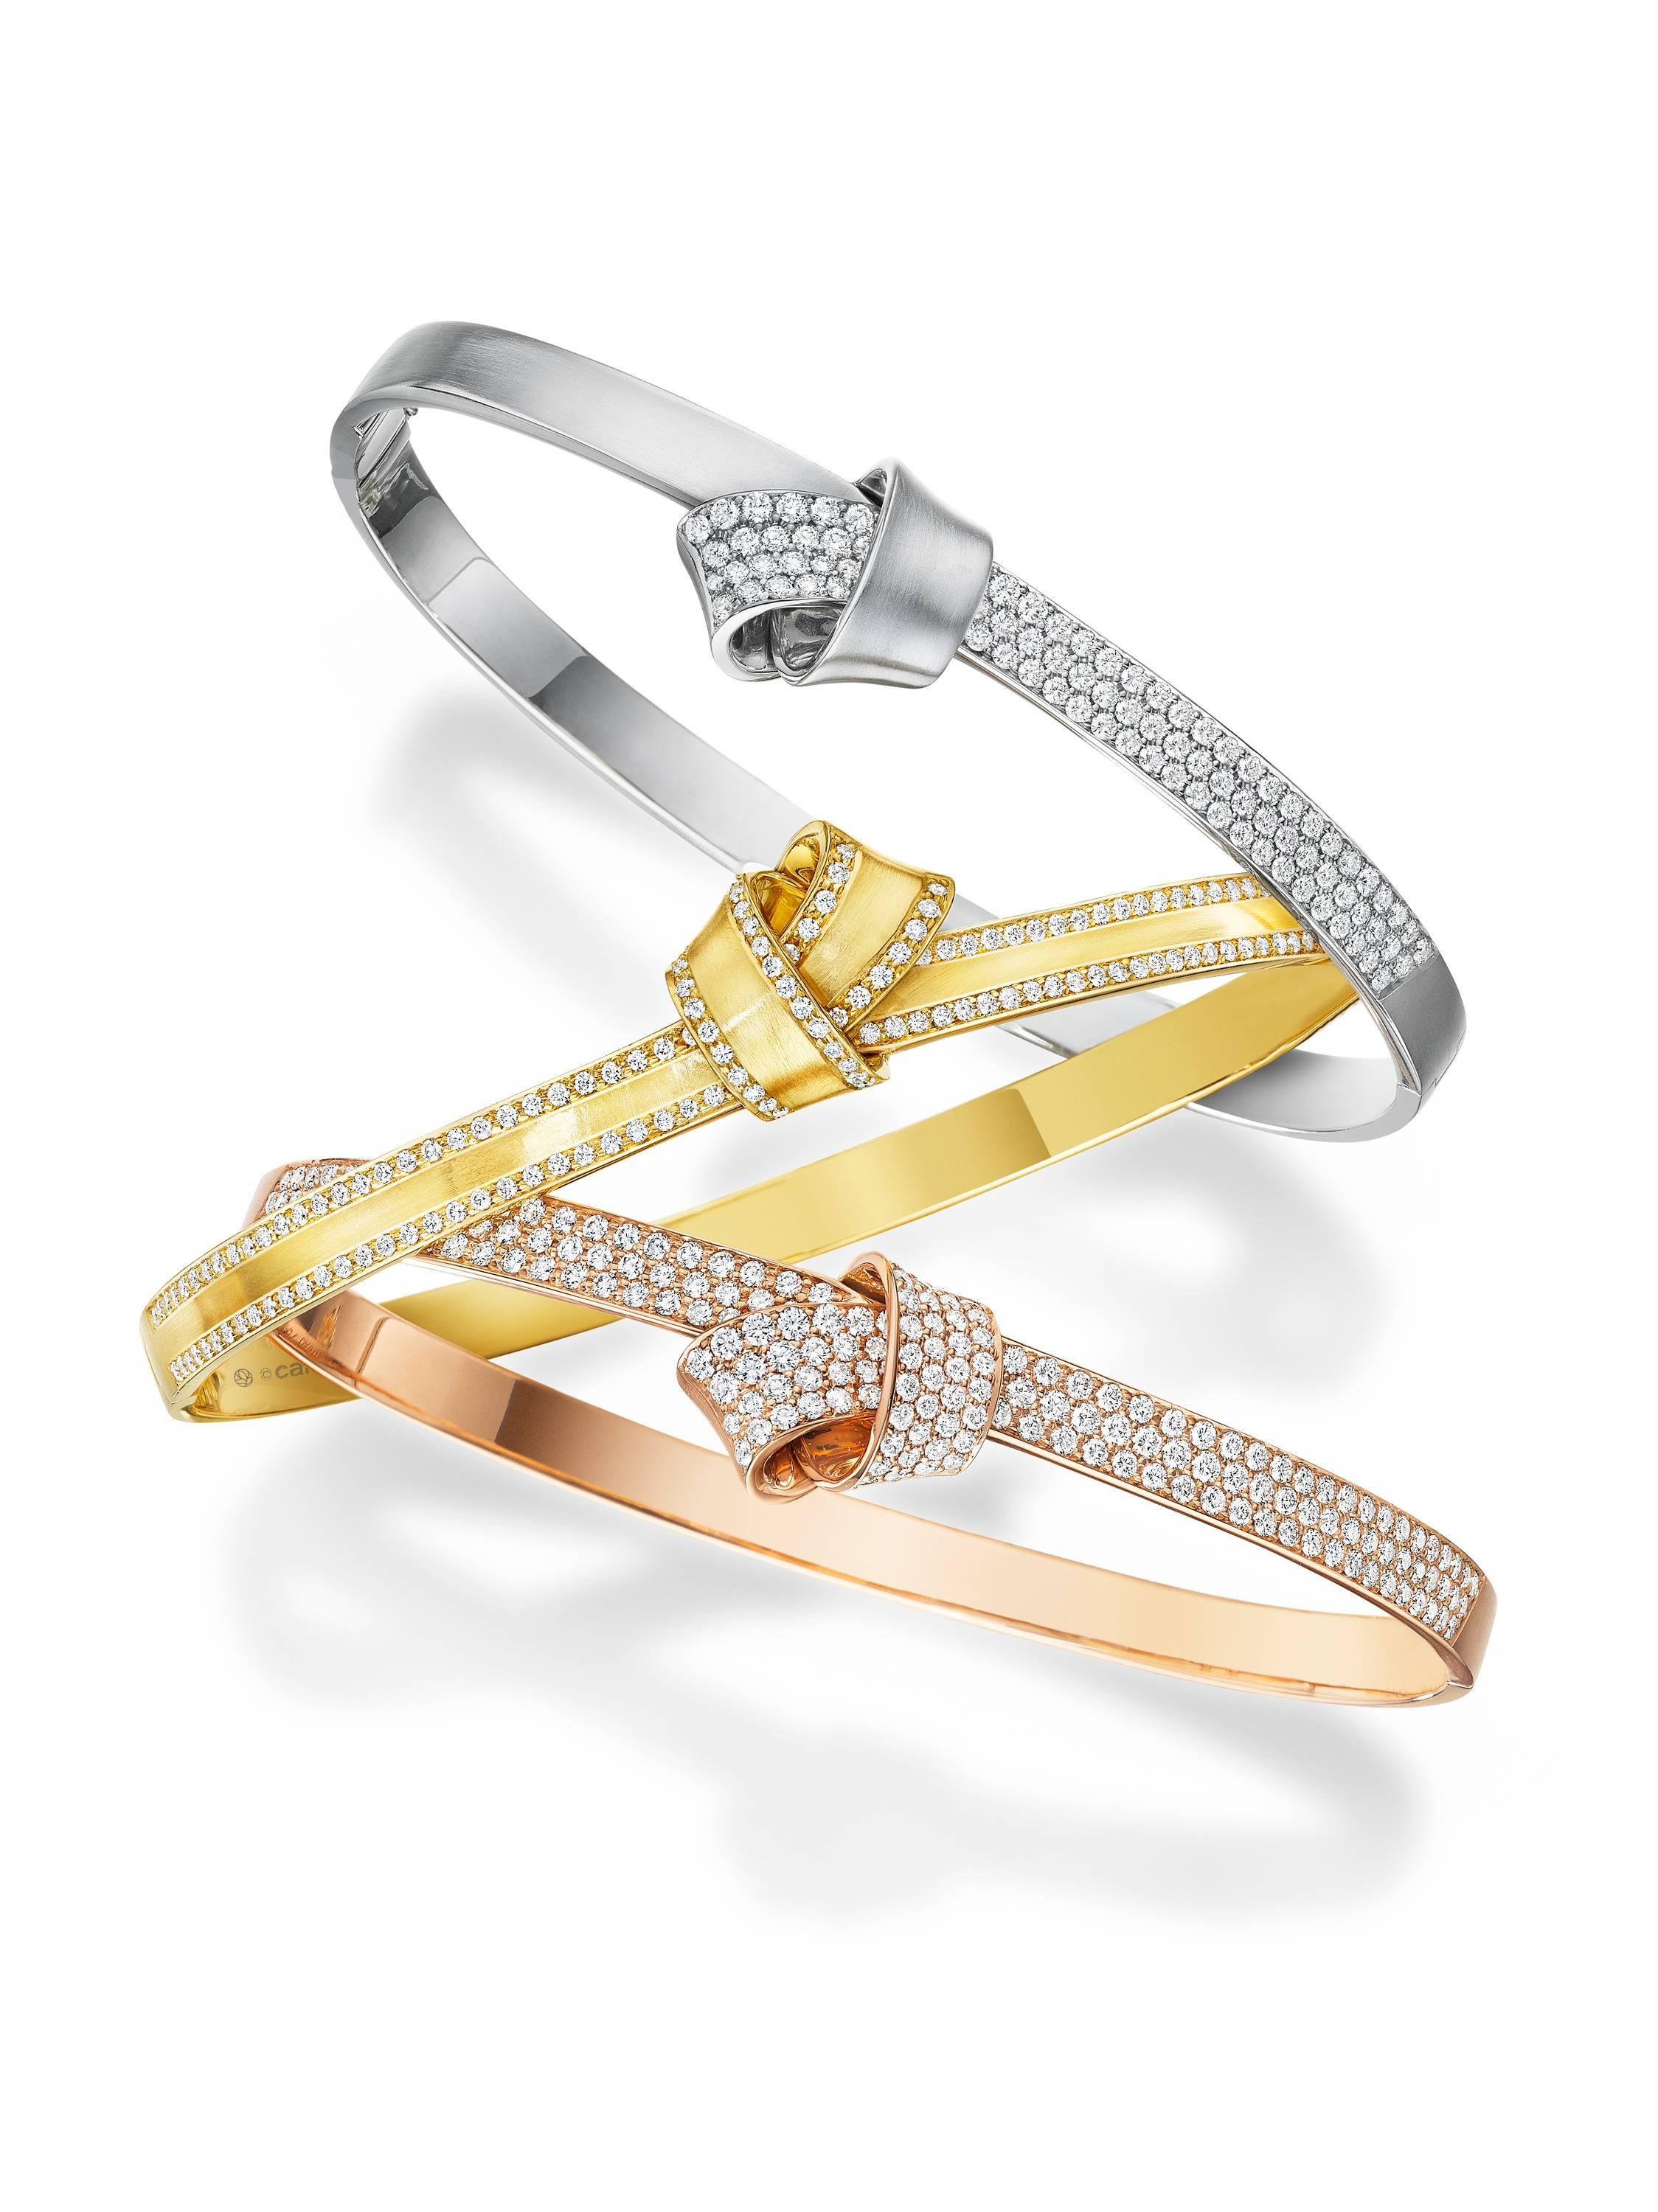 Trimmed in .71 carats of sparkling pave diamonds, folds of sumptuous 18k yellow gold encircle the wrist as a reminder of love. This structured, elegant bangle gives you around-the-clock glamour.  The bangle features a safety lock closure for